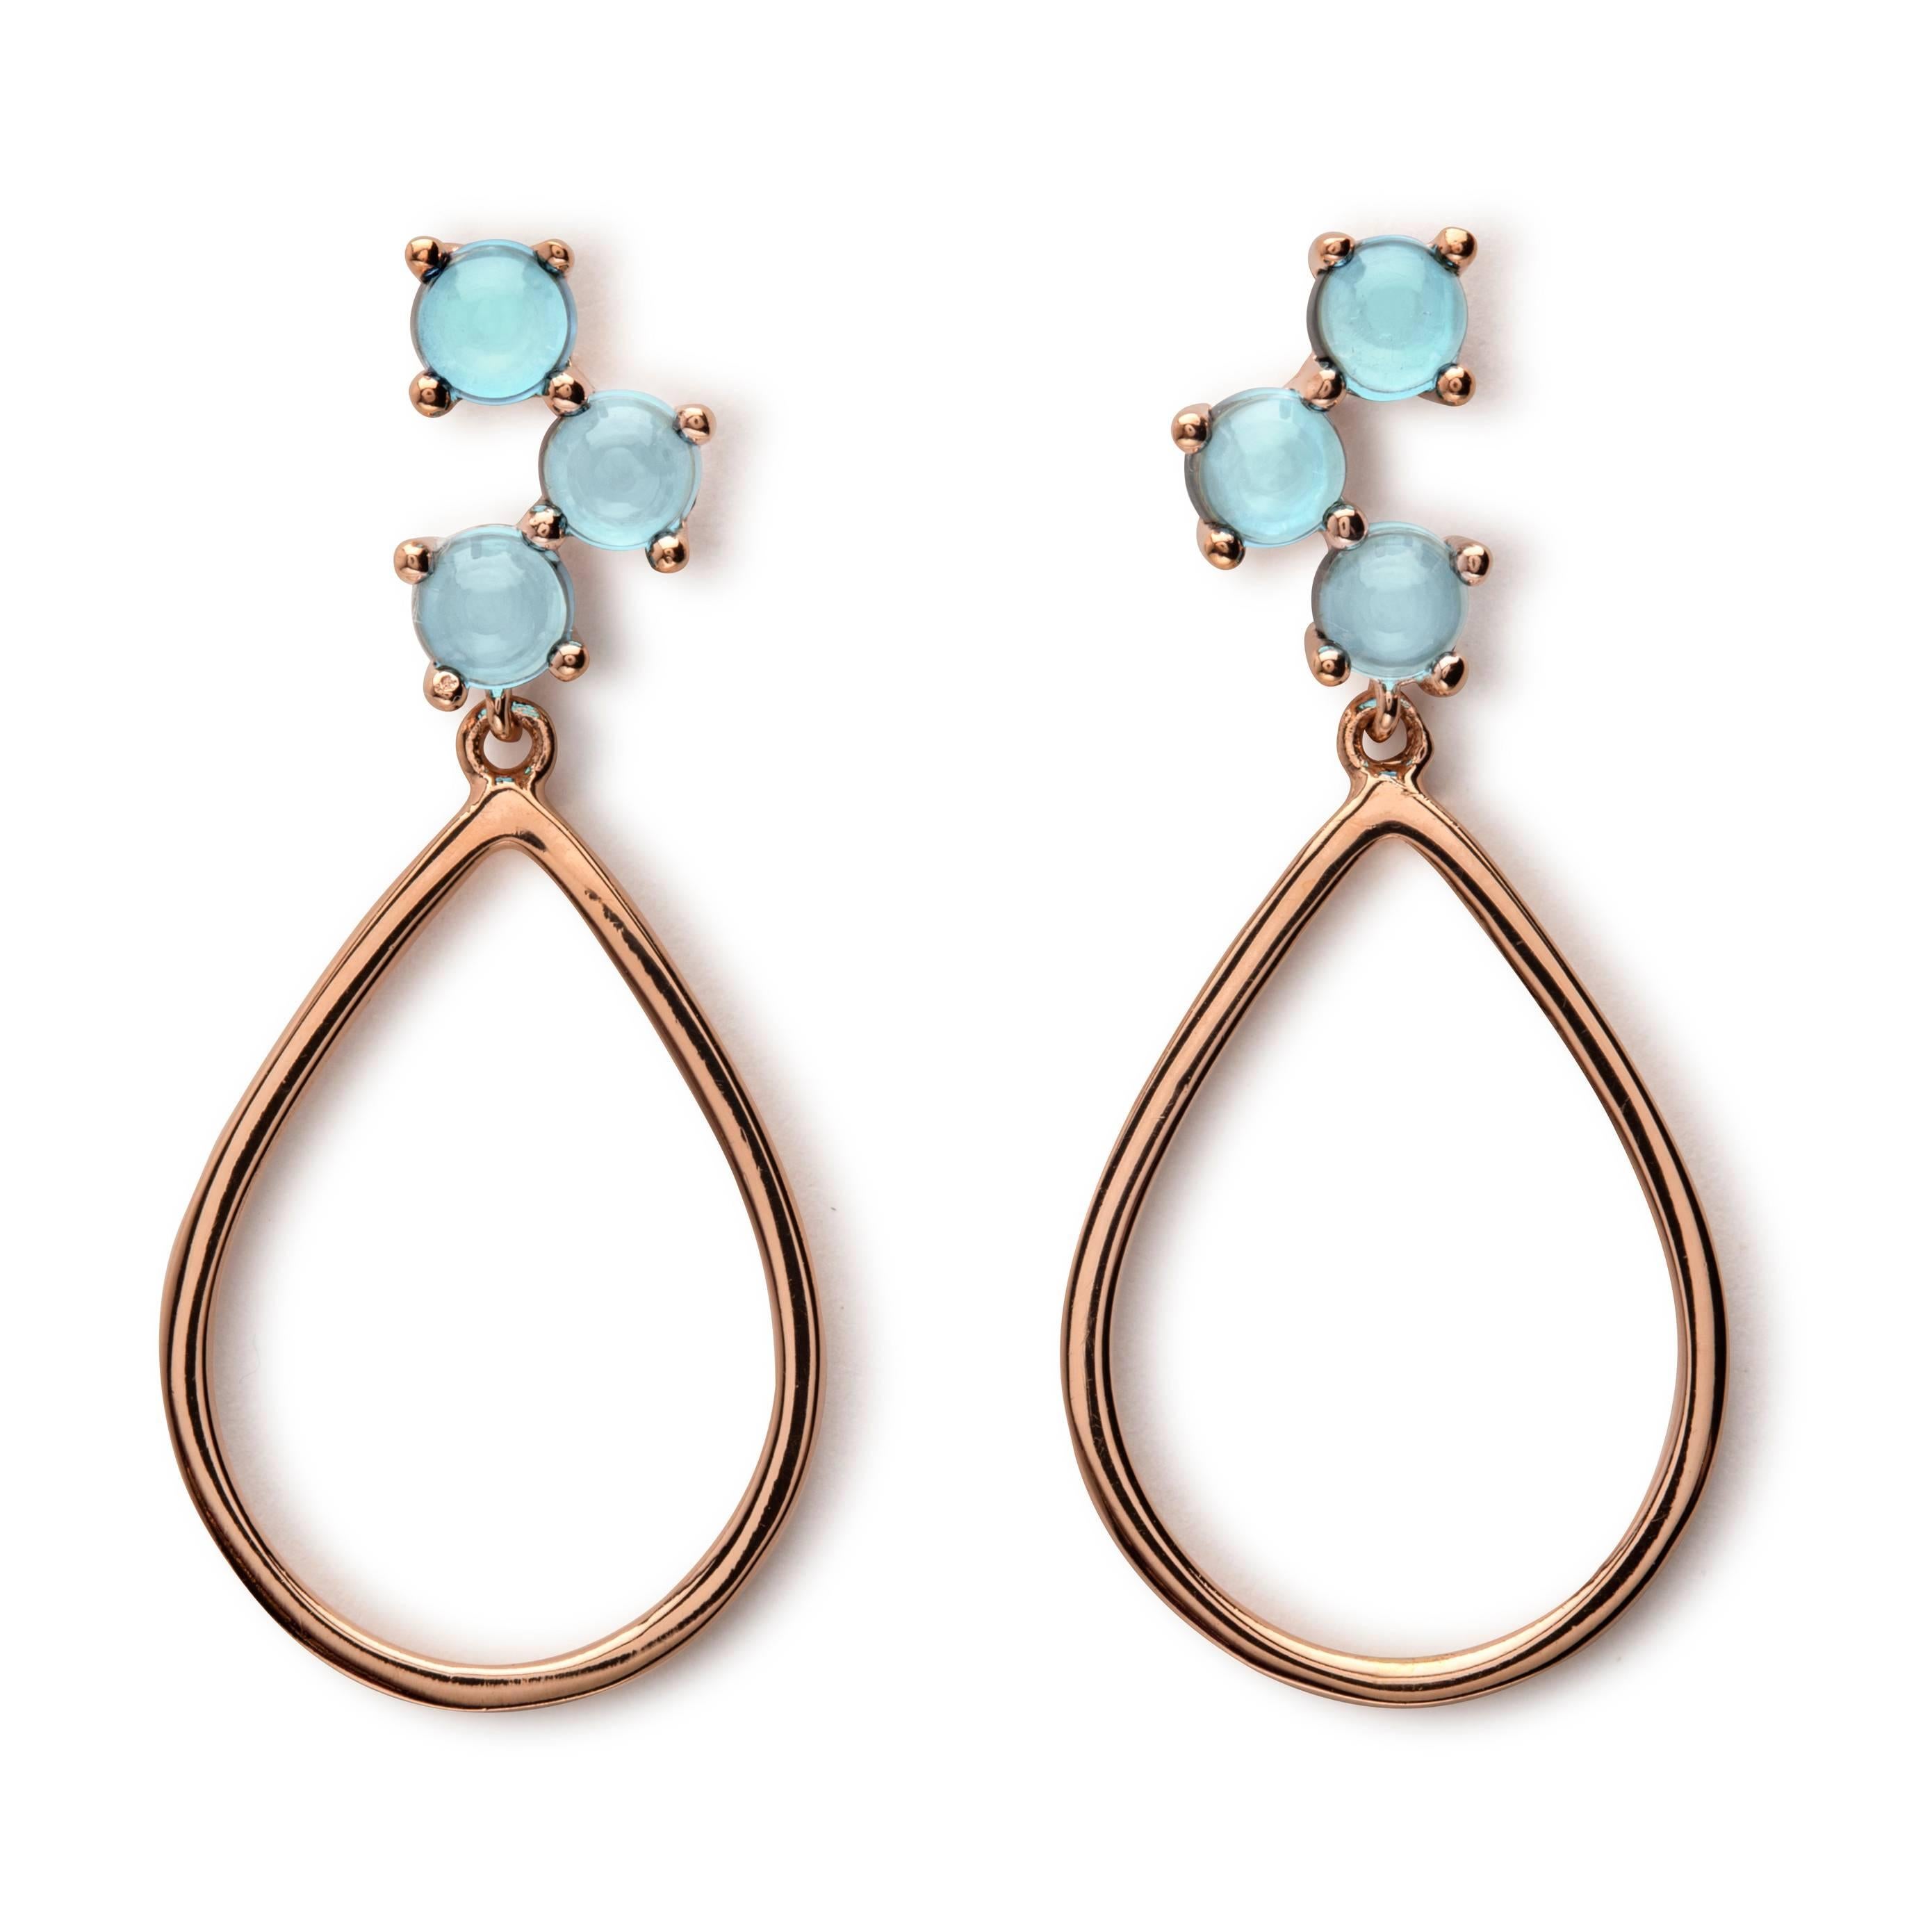 
These gorgeous drop earrings with three 4mm cabochon stones are everyday chic, dress them up or down. The total length of the earrings is 38mm, the gold metal is 2mm deep and they are 18mm at their widest point. Style them with our Skopelos